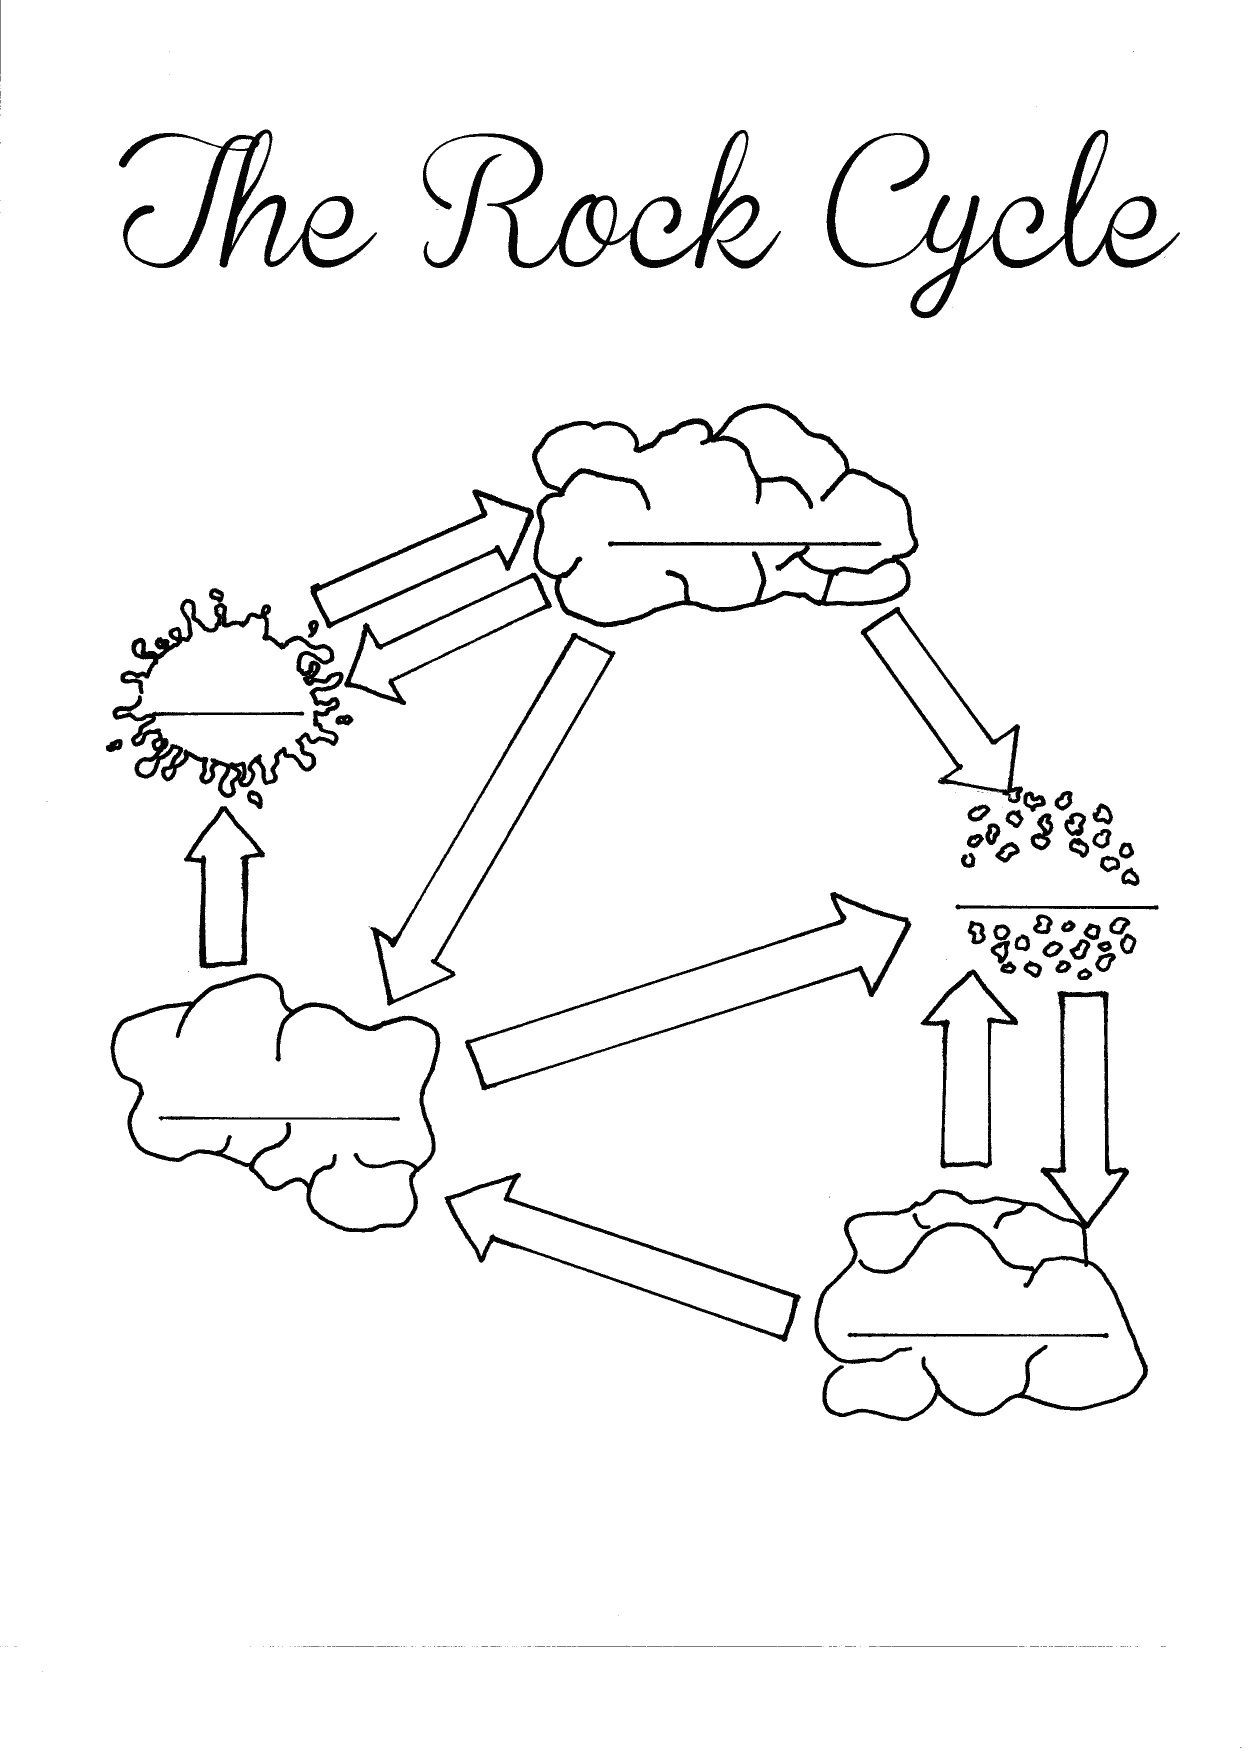 Rock Cycle Worksheet Answers the Rock Cycle Blank Worksheet Fill In as You Talk About